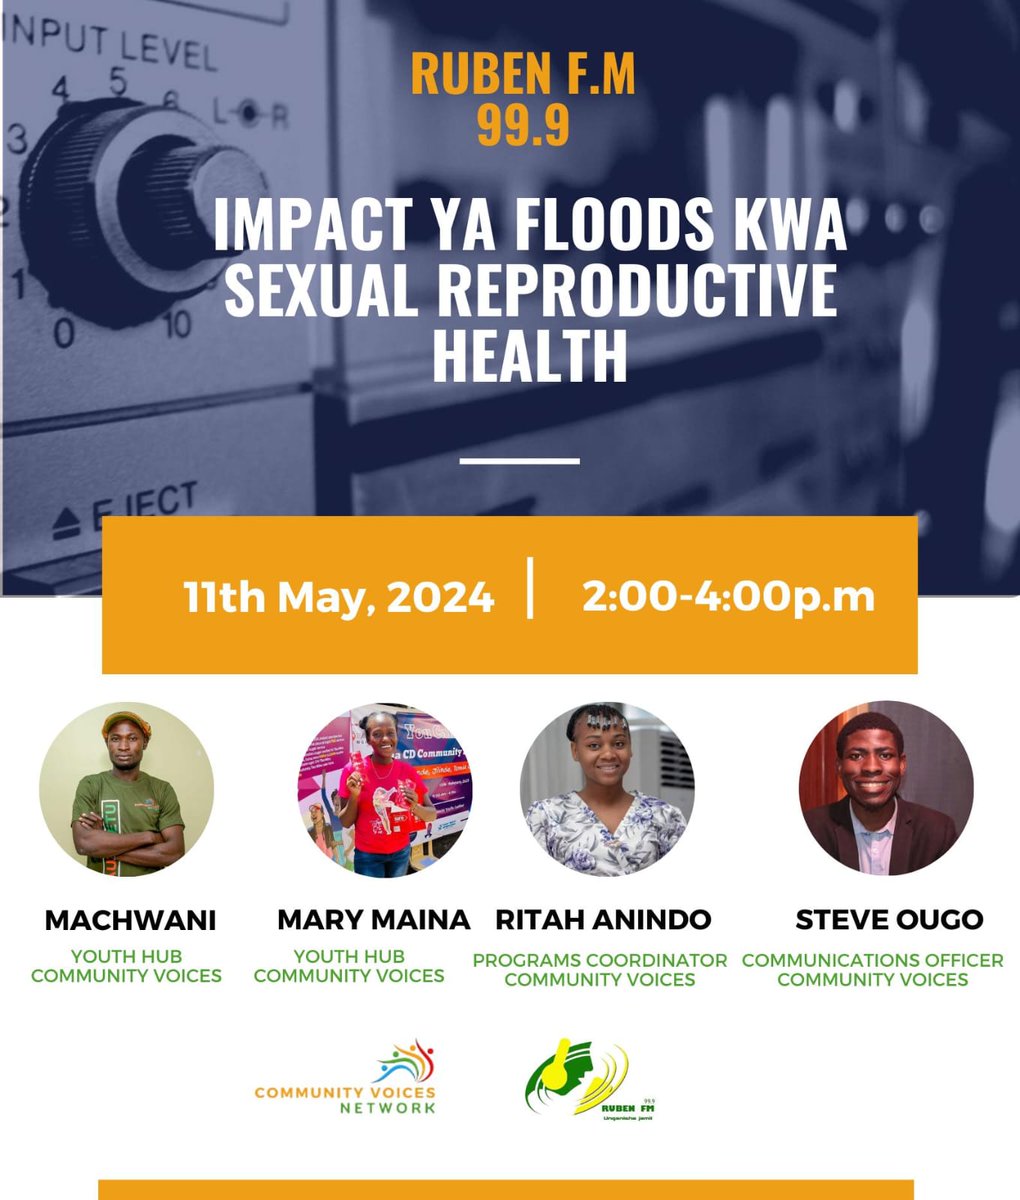 📻 Join me on May 11, from 2-4 PM, as I take over the airwaves on Rueben FM 99.9! under Community Voices Network to delve into the effects of Kenya's recent floods on sexual and reproductive health. Don't miss out - tune in! #CommunityVoices #CommunityVoices4ClimateAction